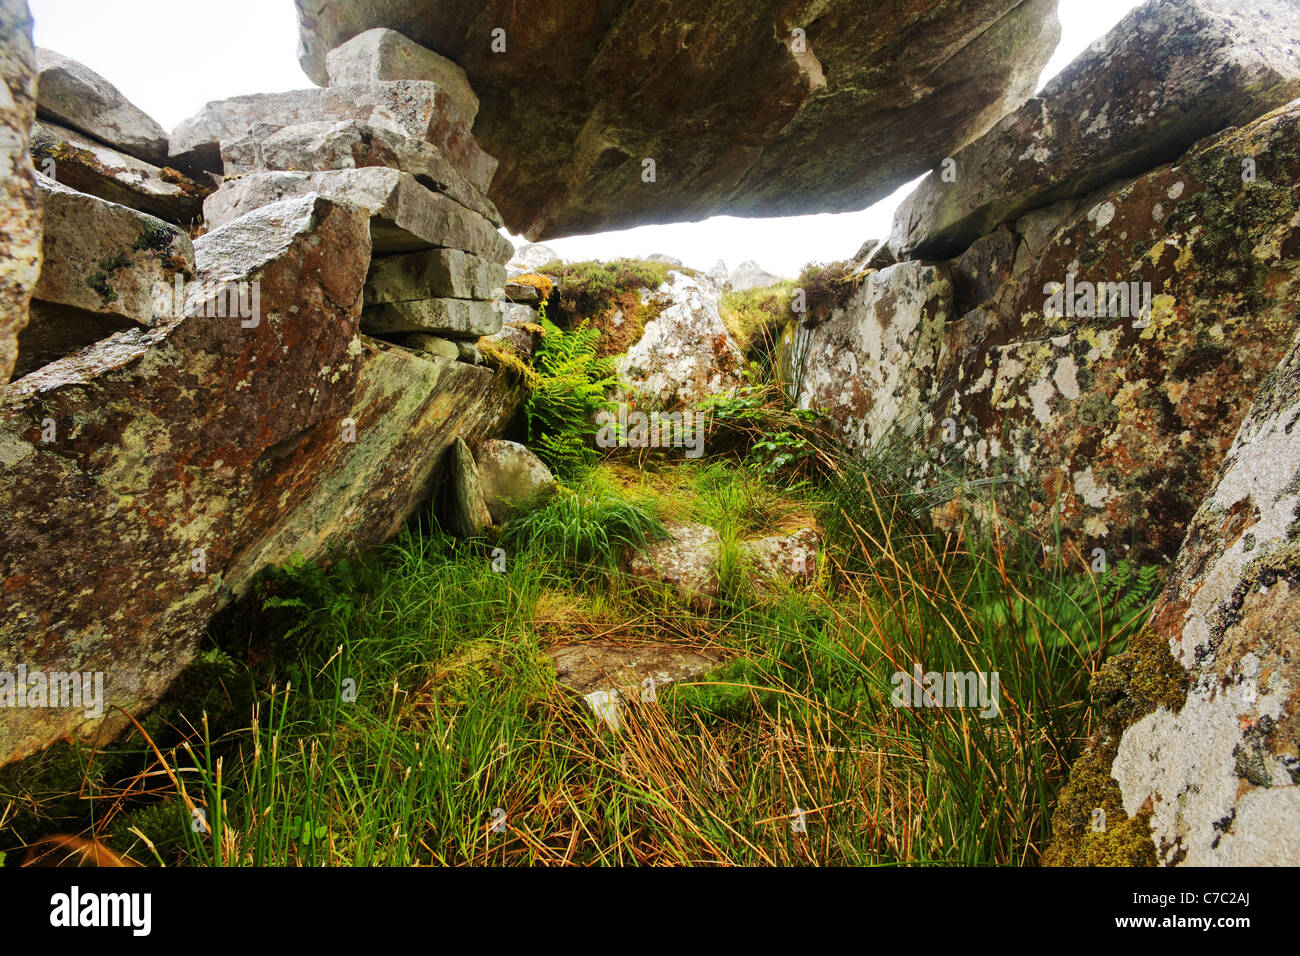 Interior of the Cloghanmore megalithic tomb chamber, County Donegal, Republic of Ireland Stock Photo